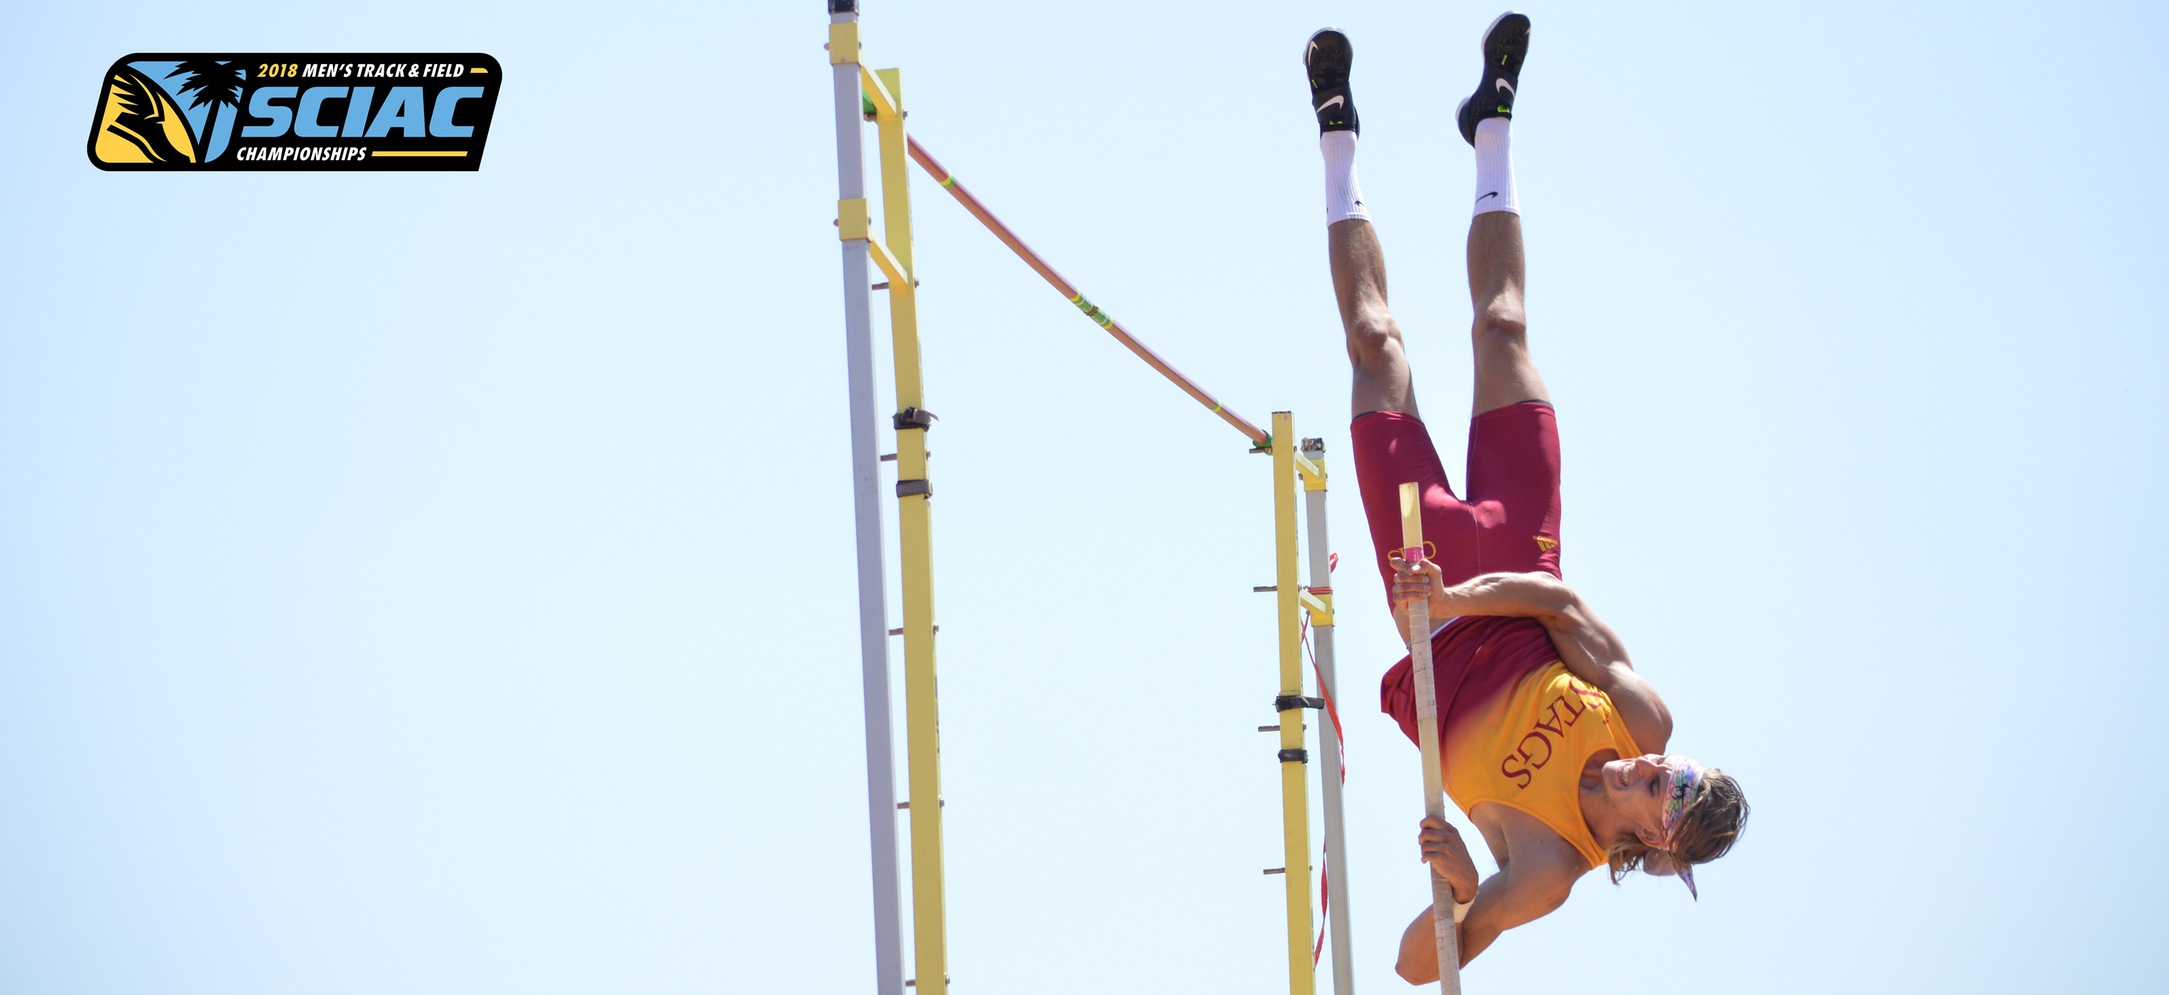 Michael Wagenveld (CMC) took fourth in the pole vault at the SCIAC Championships. (photo credit: Hannah Graves)